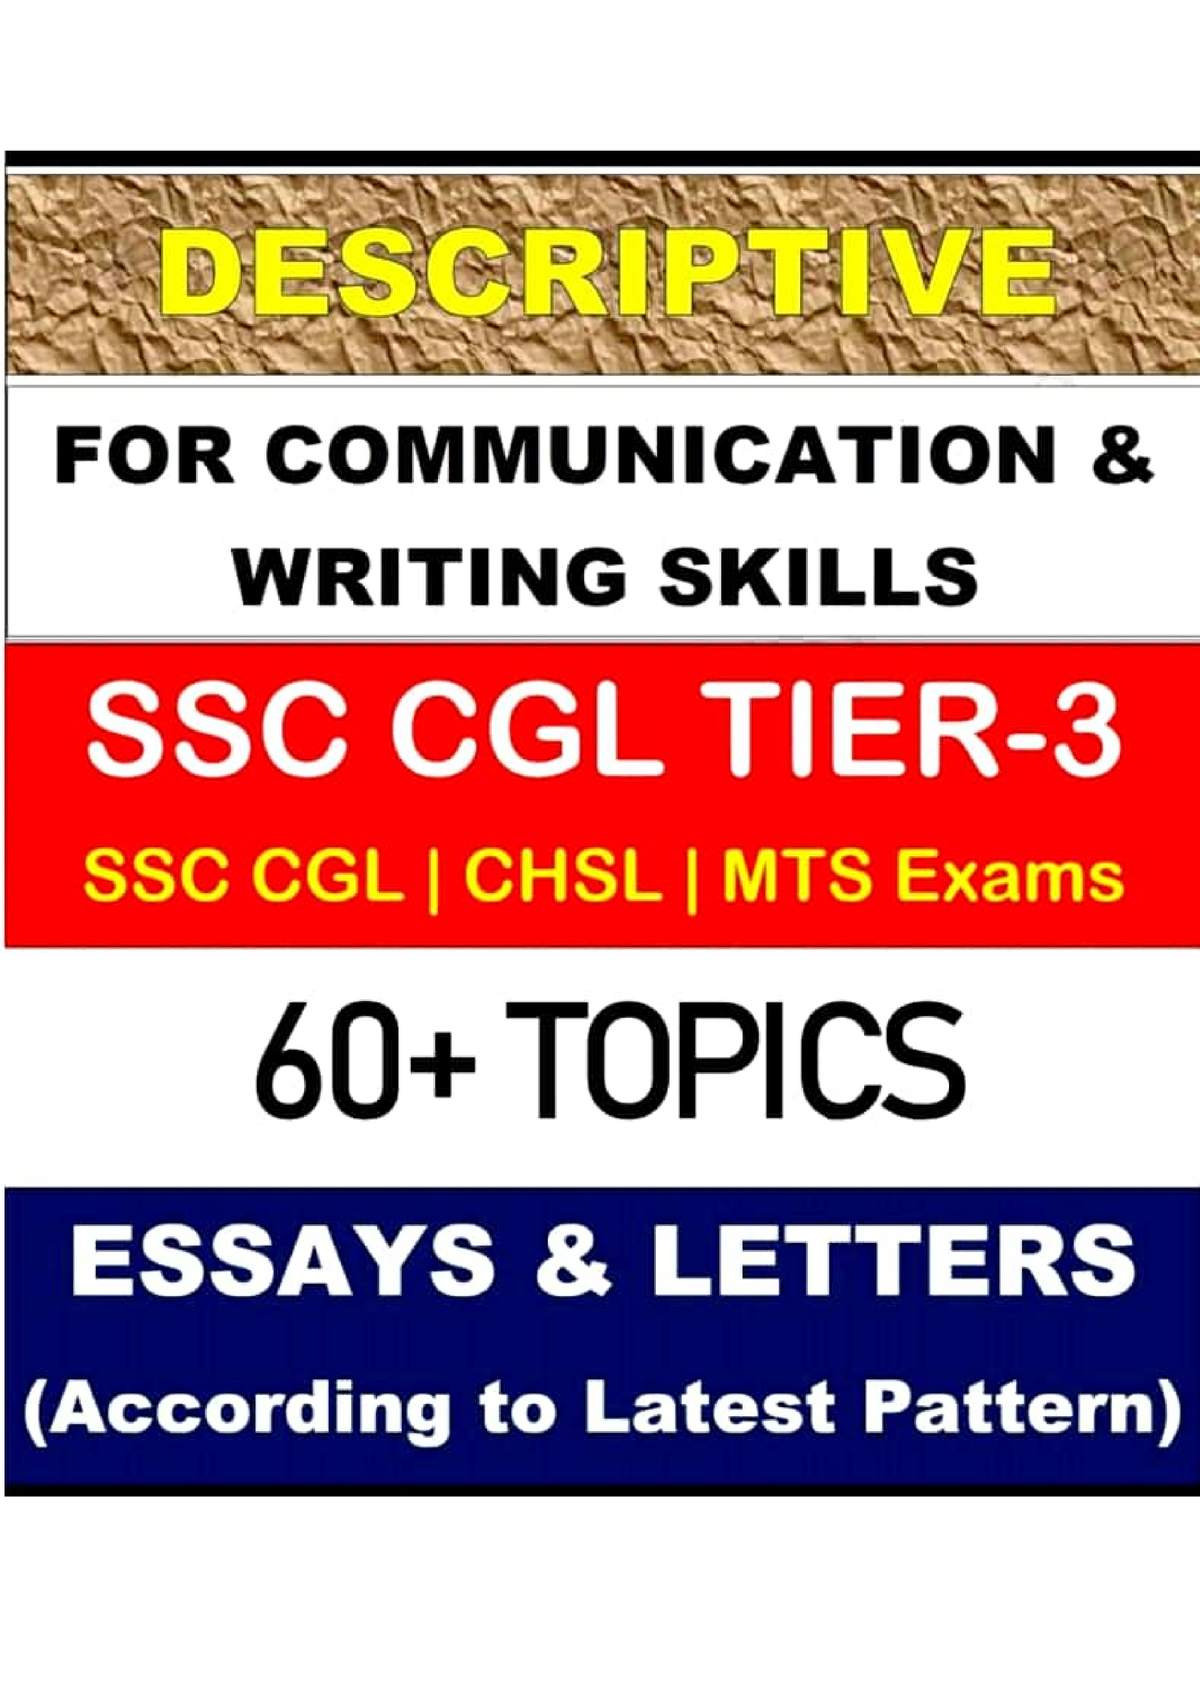 ssc essay and letter writing book pdf